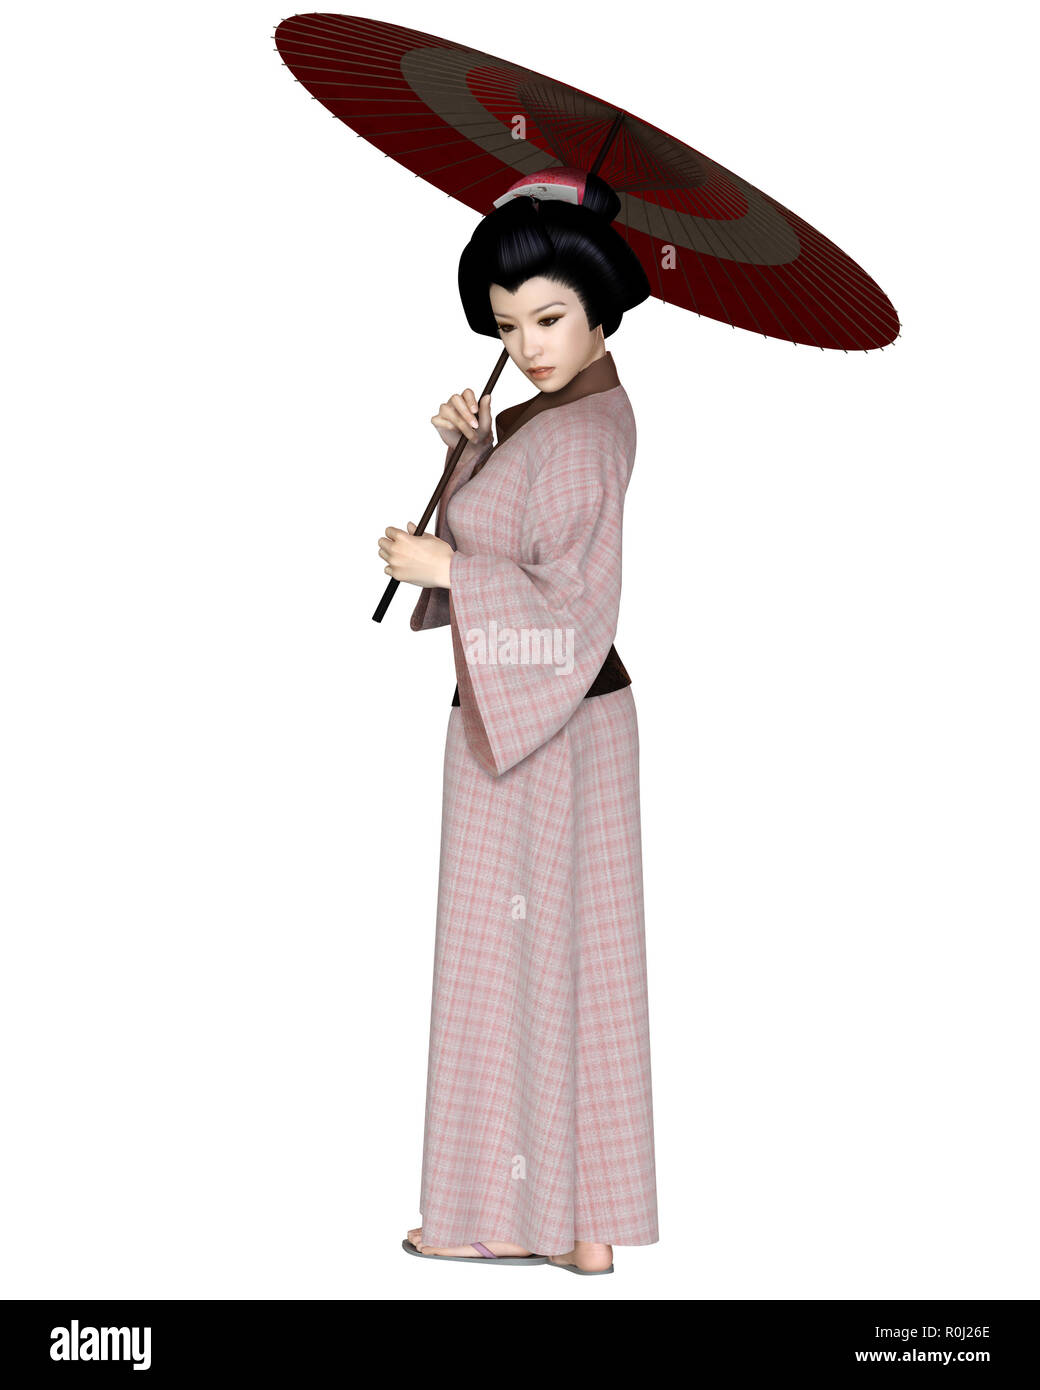 Young Japanese Woman in Pink Kimono with Parasol Stock Photo